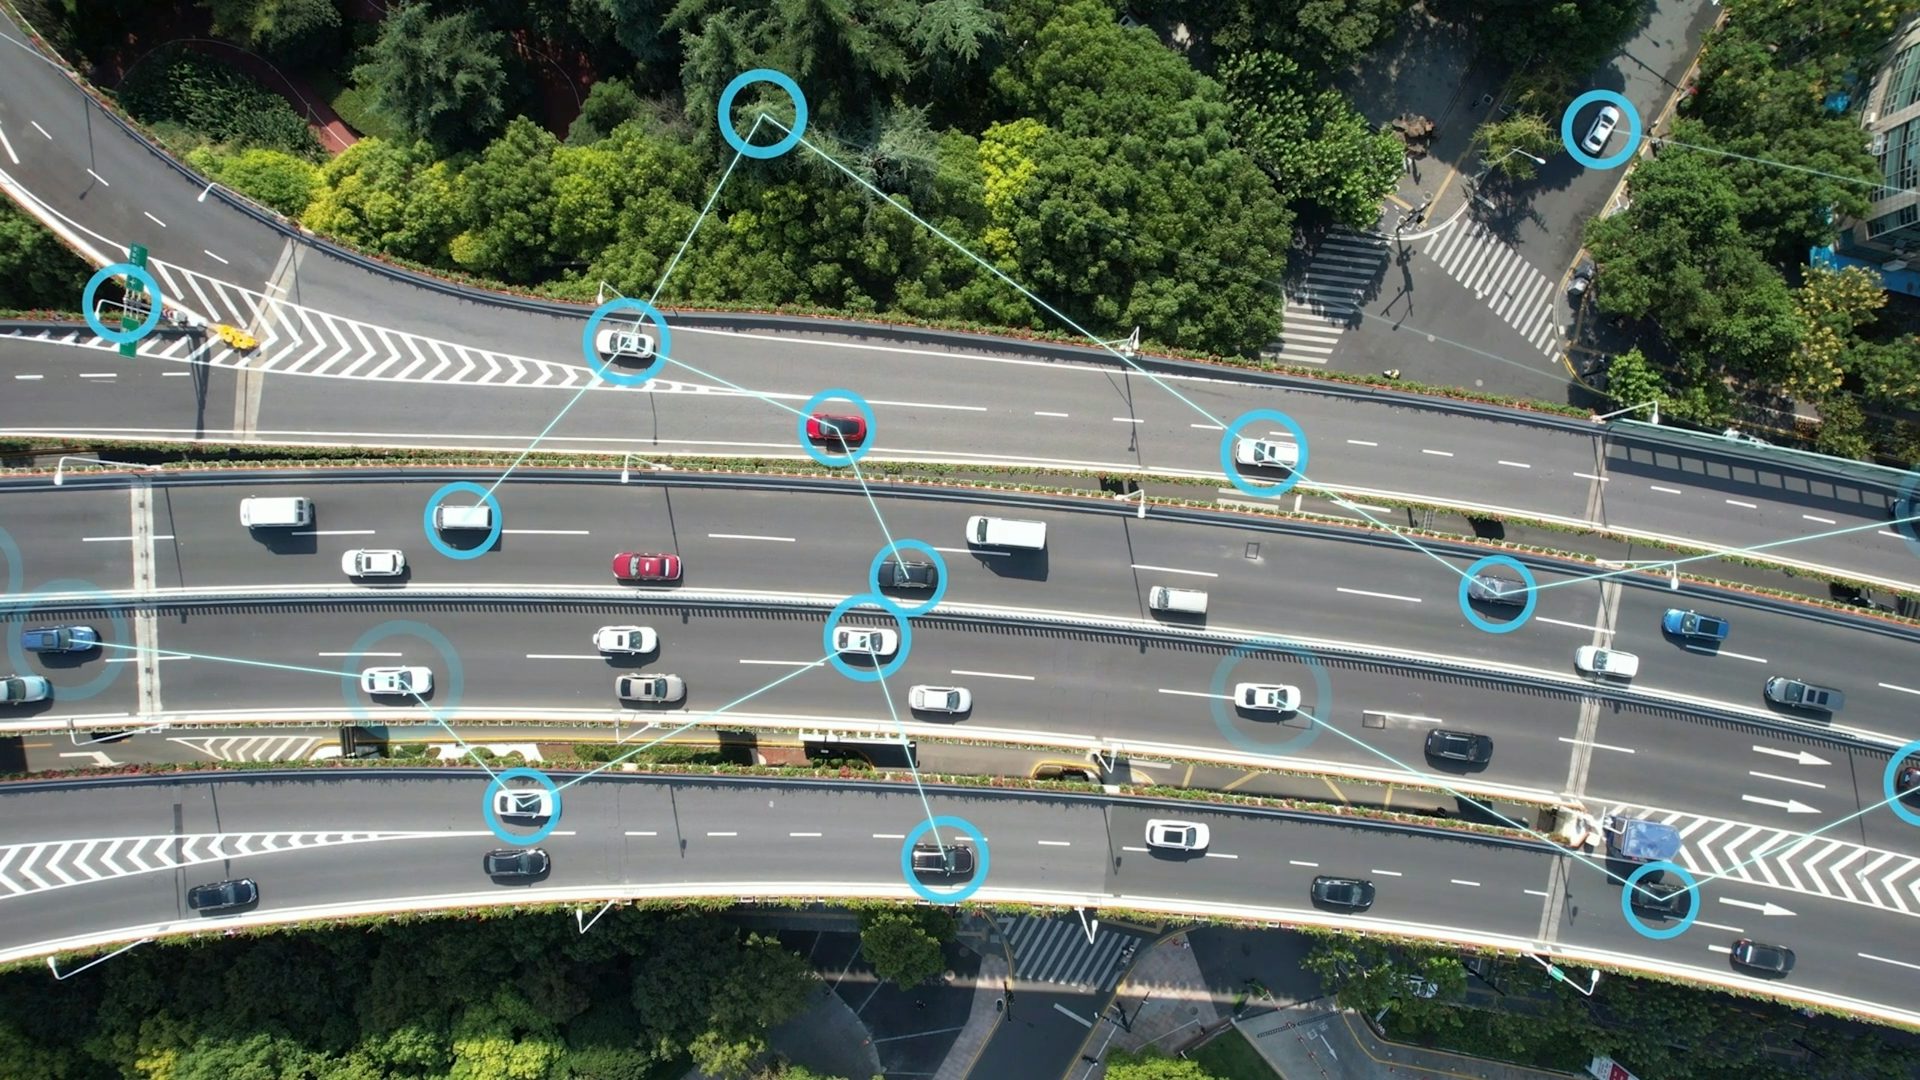 Sky view of cars on a freeway with graphic circles around some cars, and lines connecting those circles